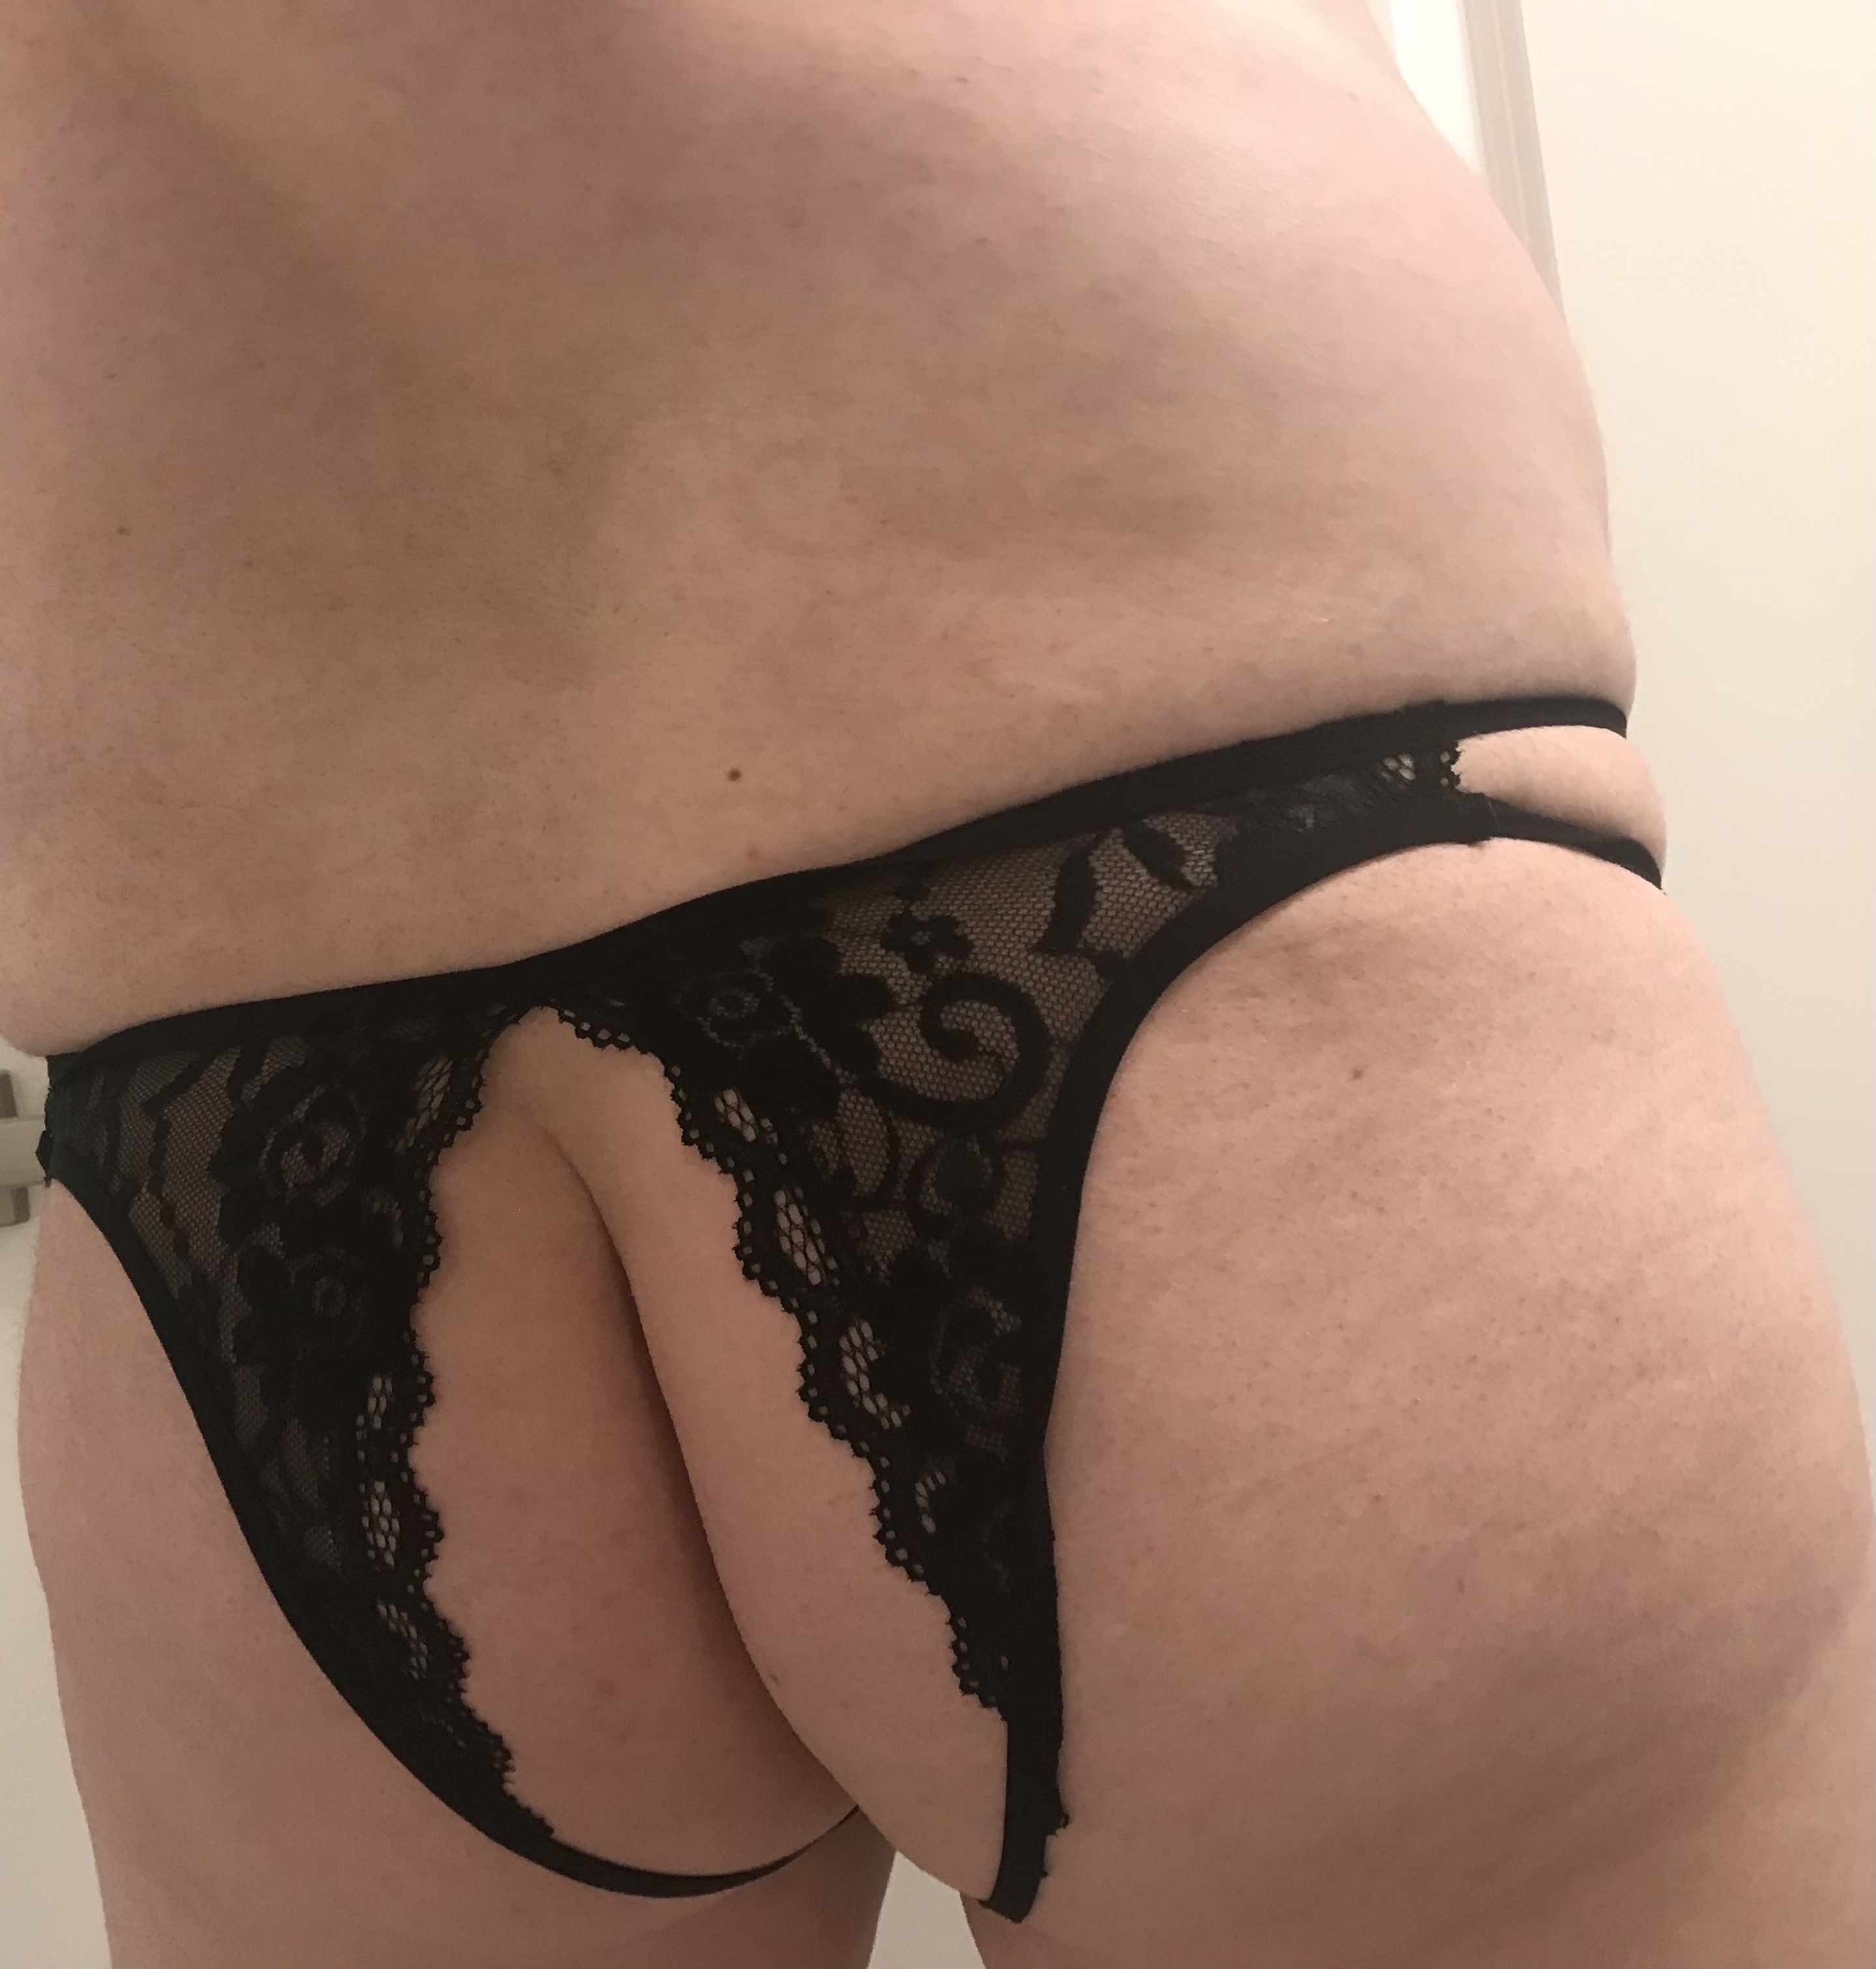 Crotchless panties are perfect for a bi cuckold like you, cucky!